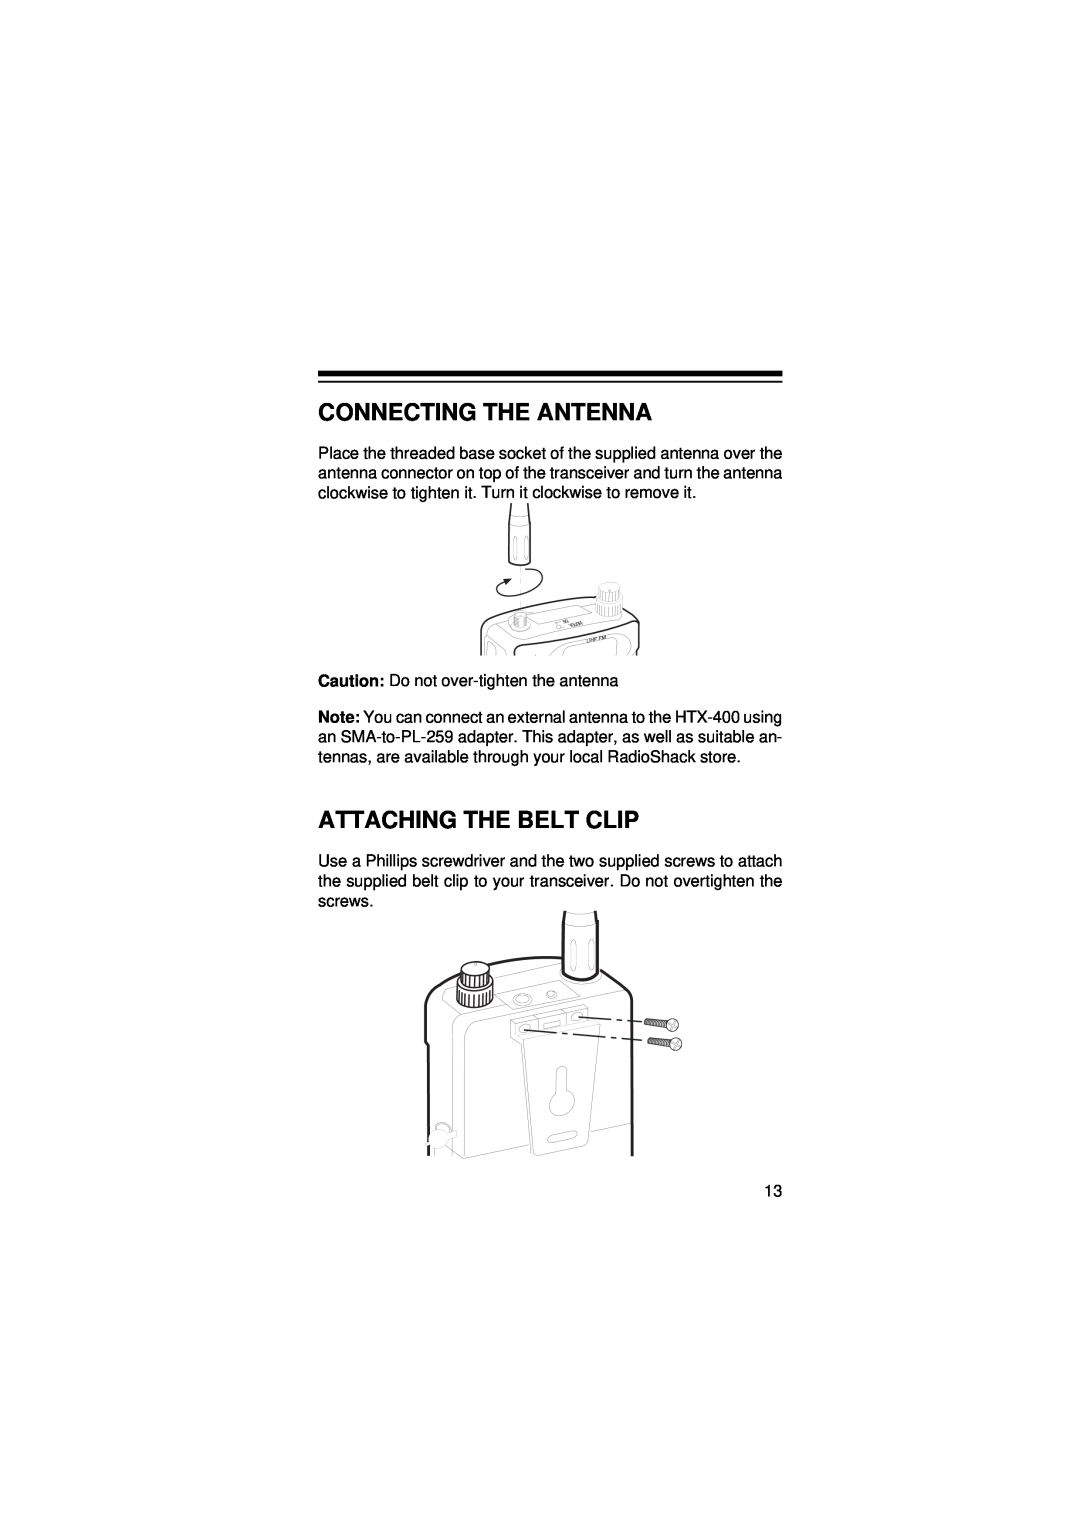 Radio Shack HTX-400 owner manual Connecting The Antenna, Attaching The Belt Clip 